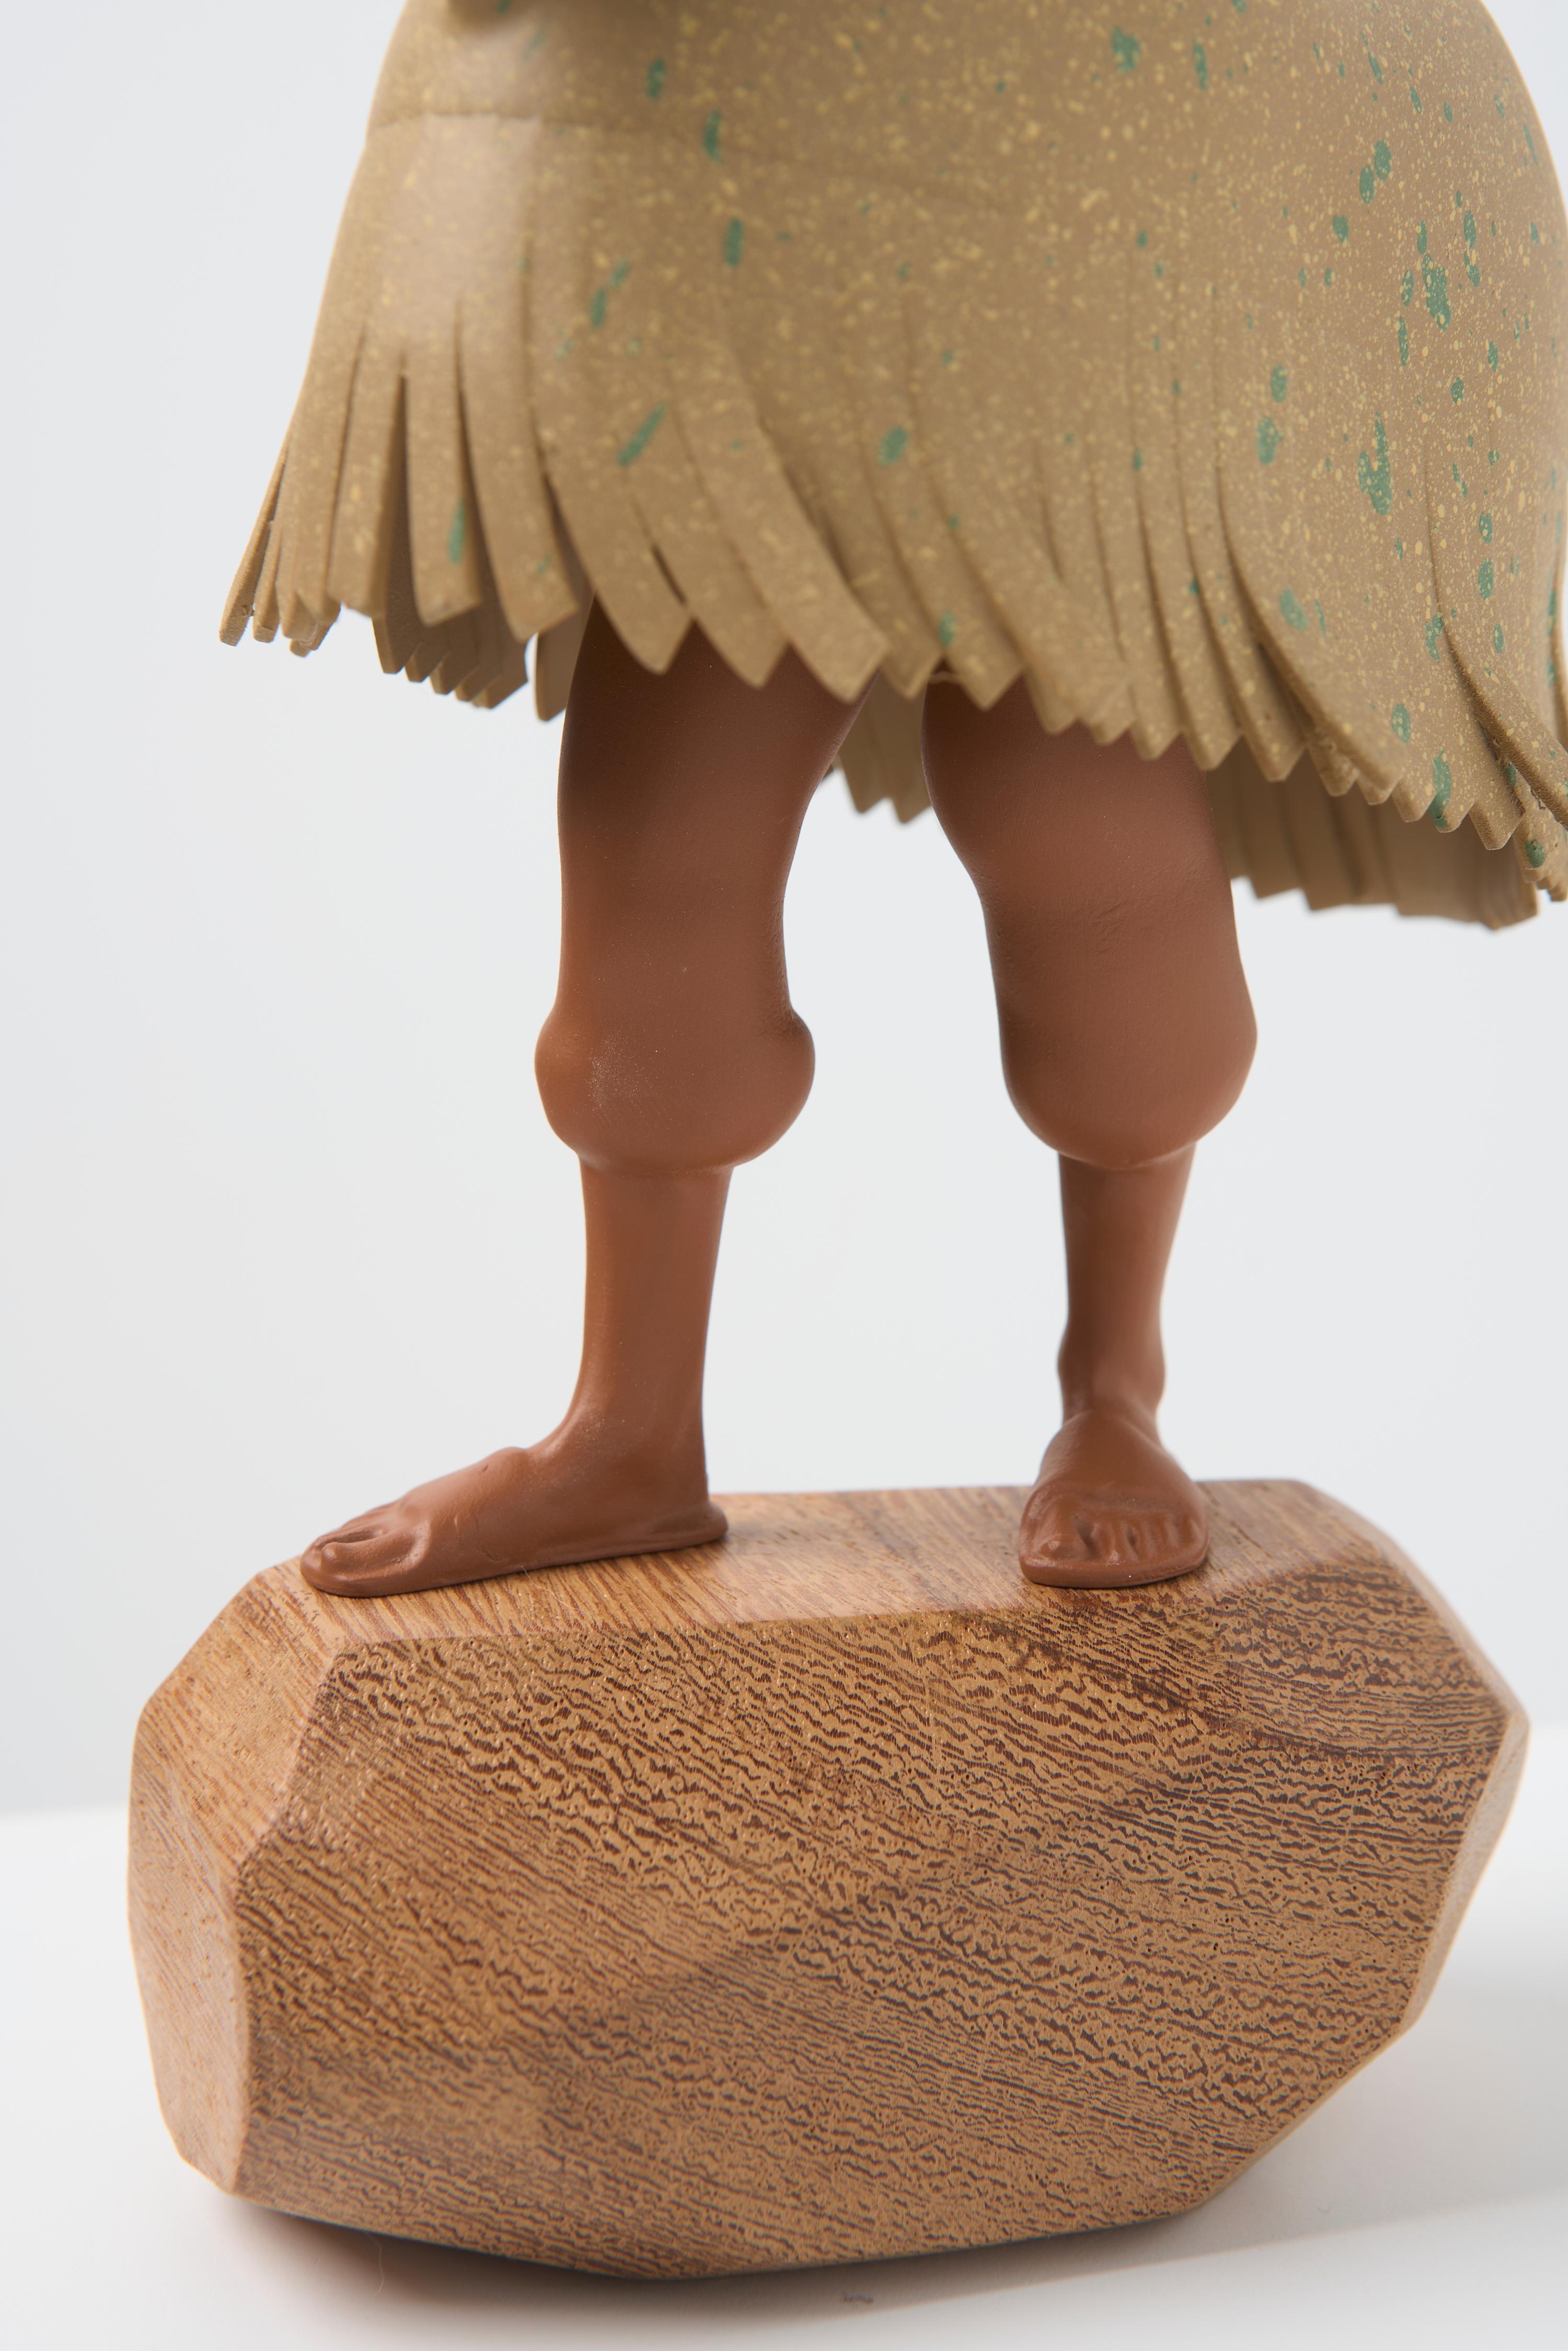 Brazilian Bumba Meu Boi Series, Resin Folklore Sculpture N2 with Wooden Base For Sale